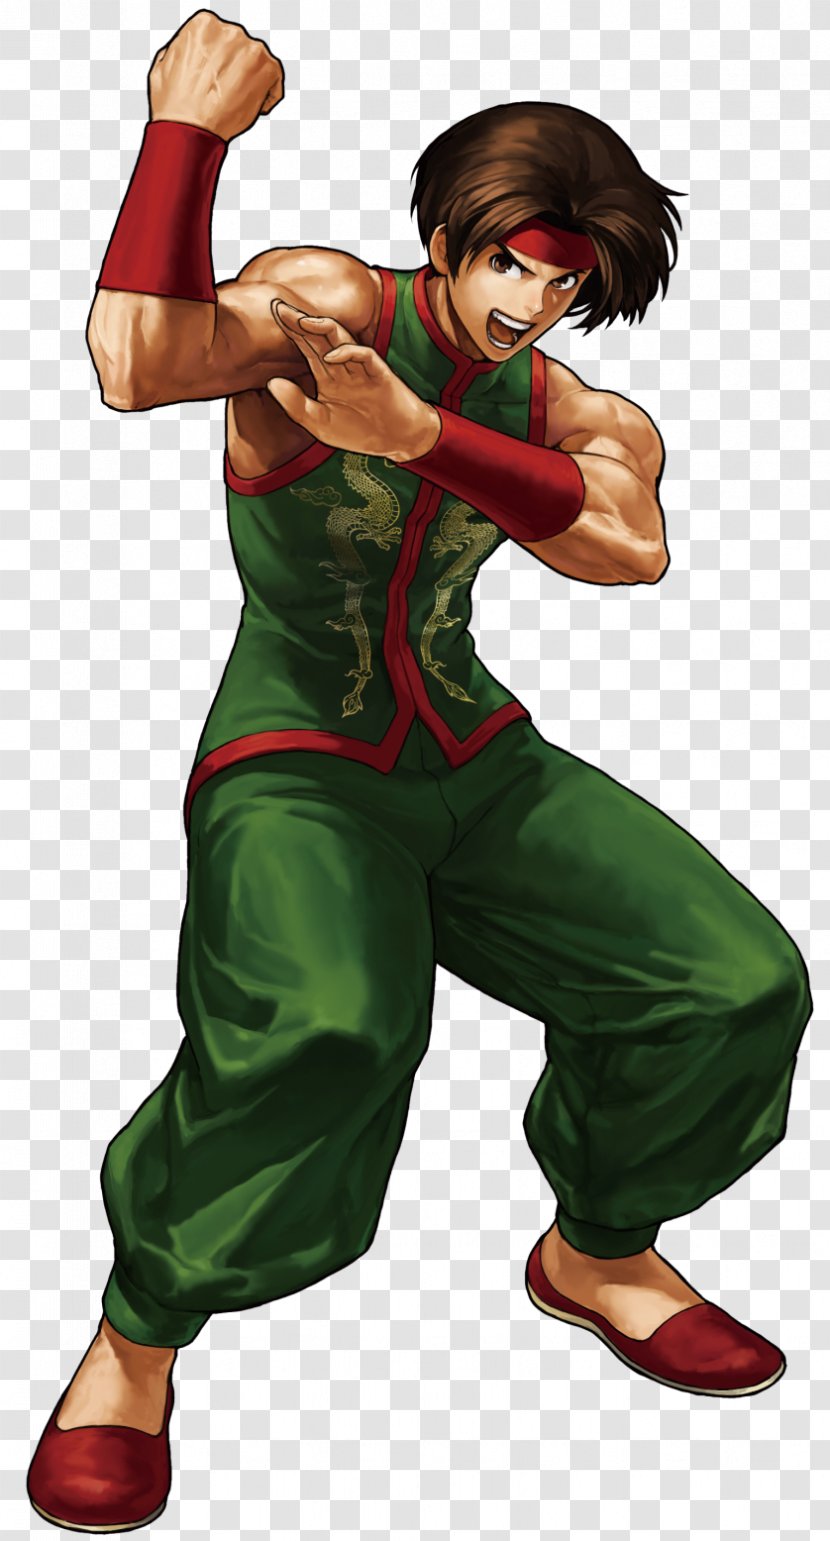 The King Of Fighters XIII '98 Psycho Soldier 2001 - Athena Asamiya - Street Fighter Transparent PNG